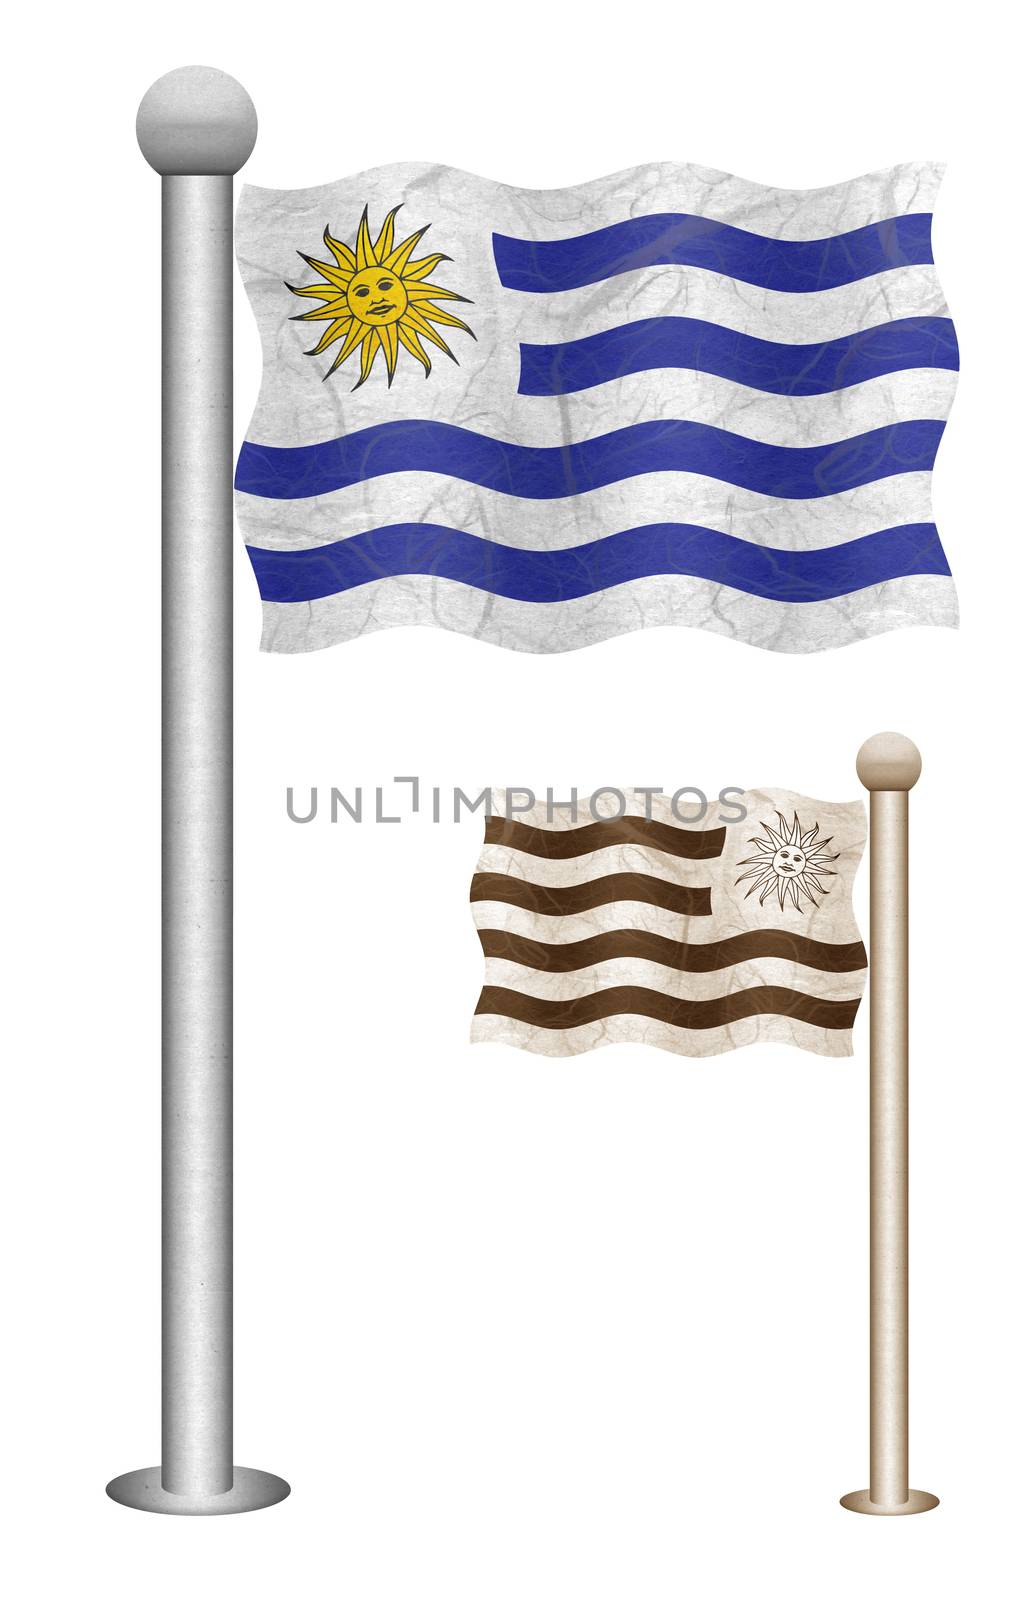 Uruguay flag waving on the wind. Flags of countries in South America. Mulberry paper on white background.